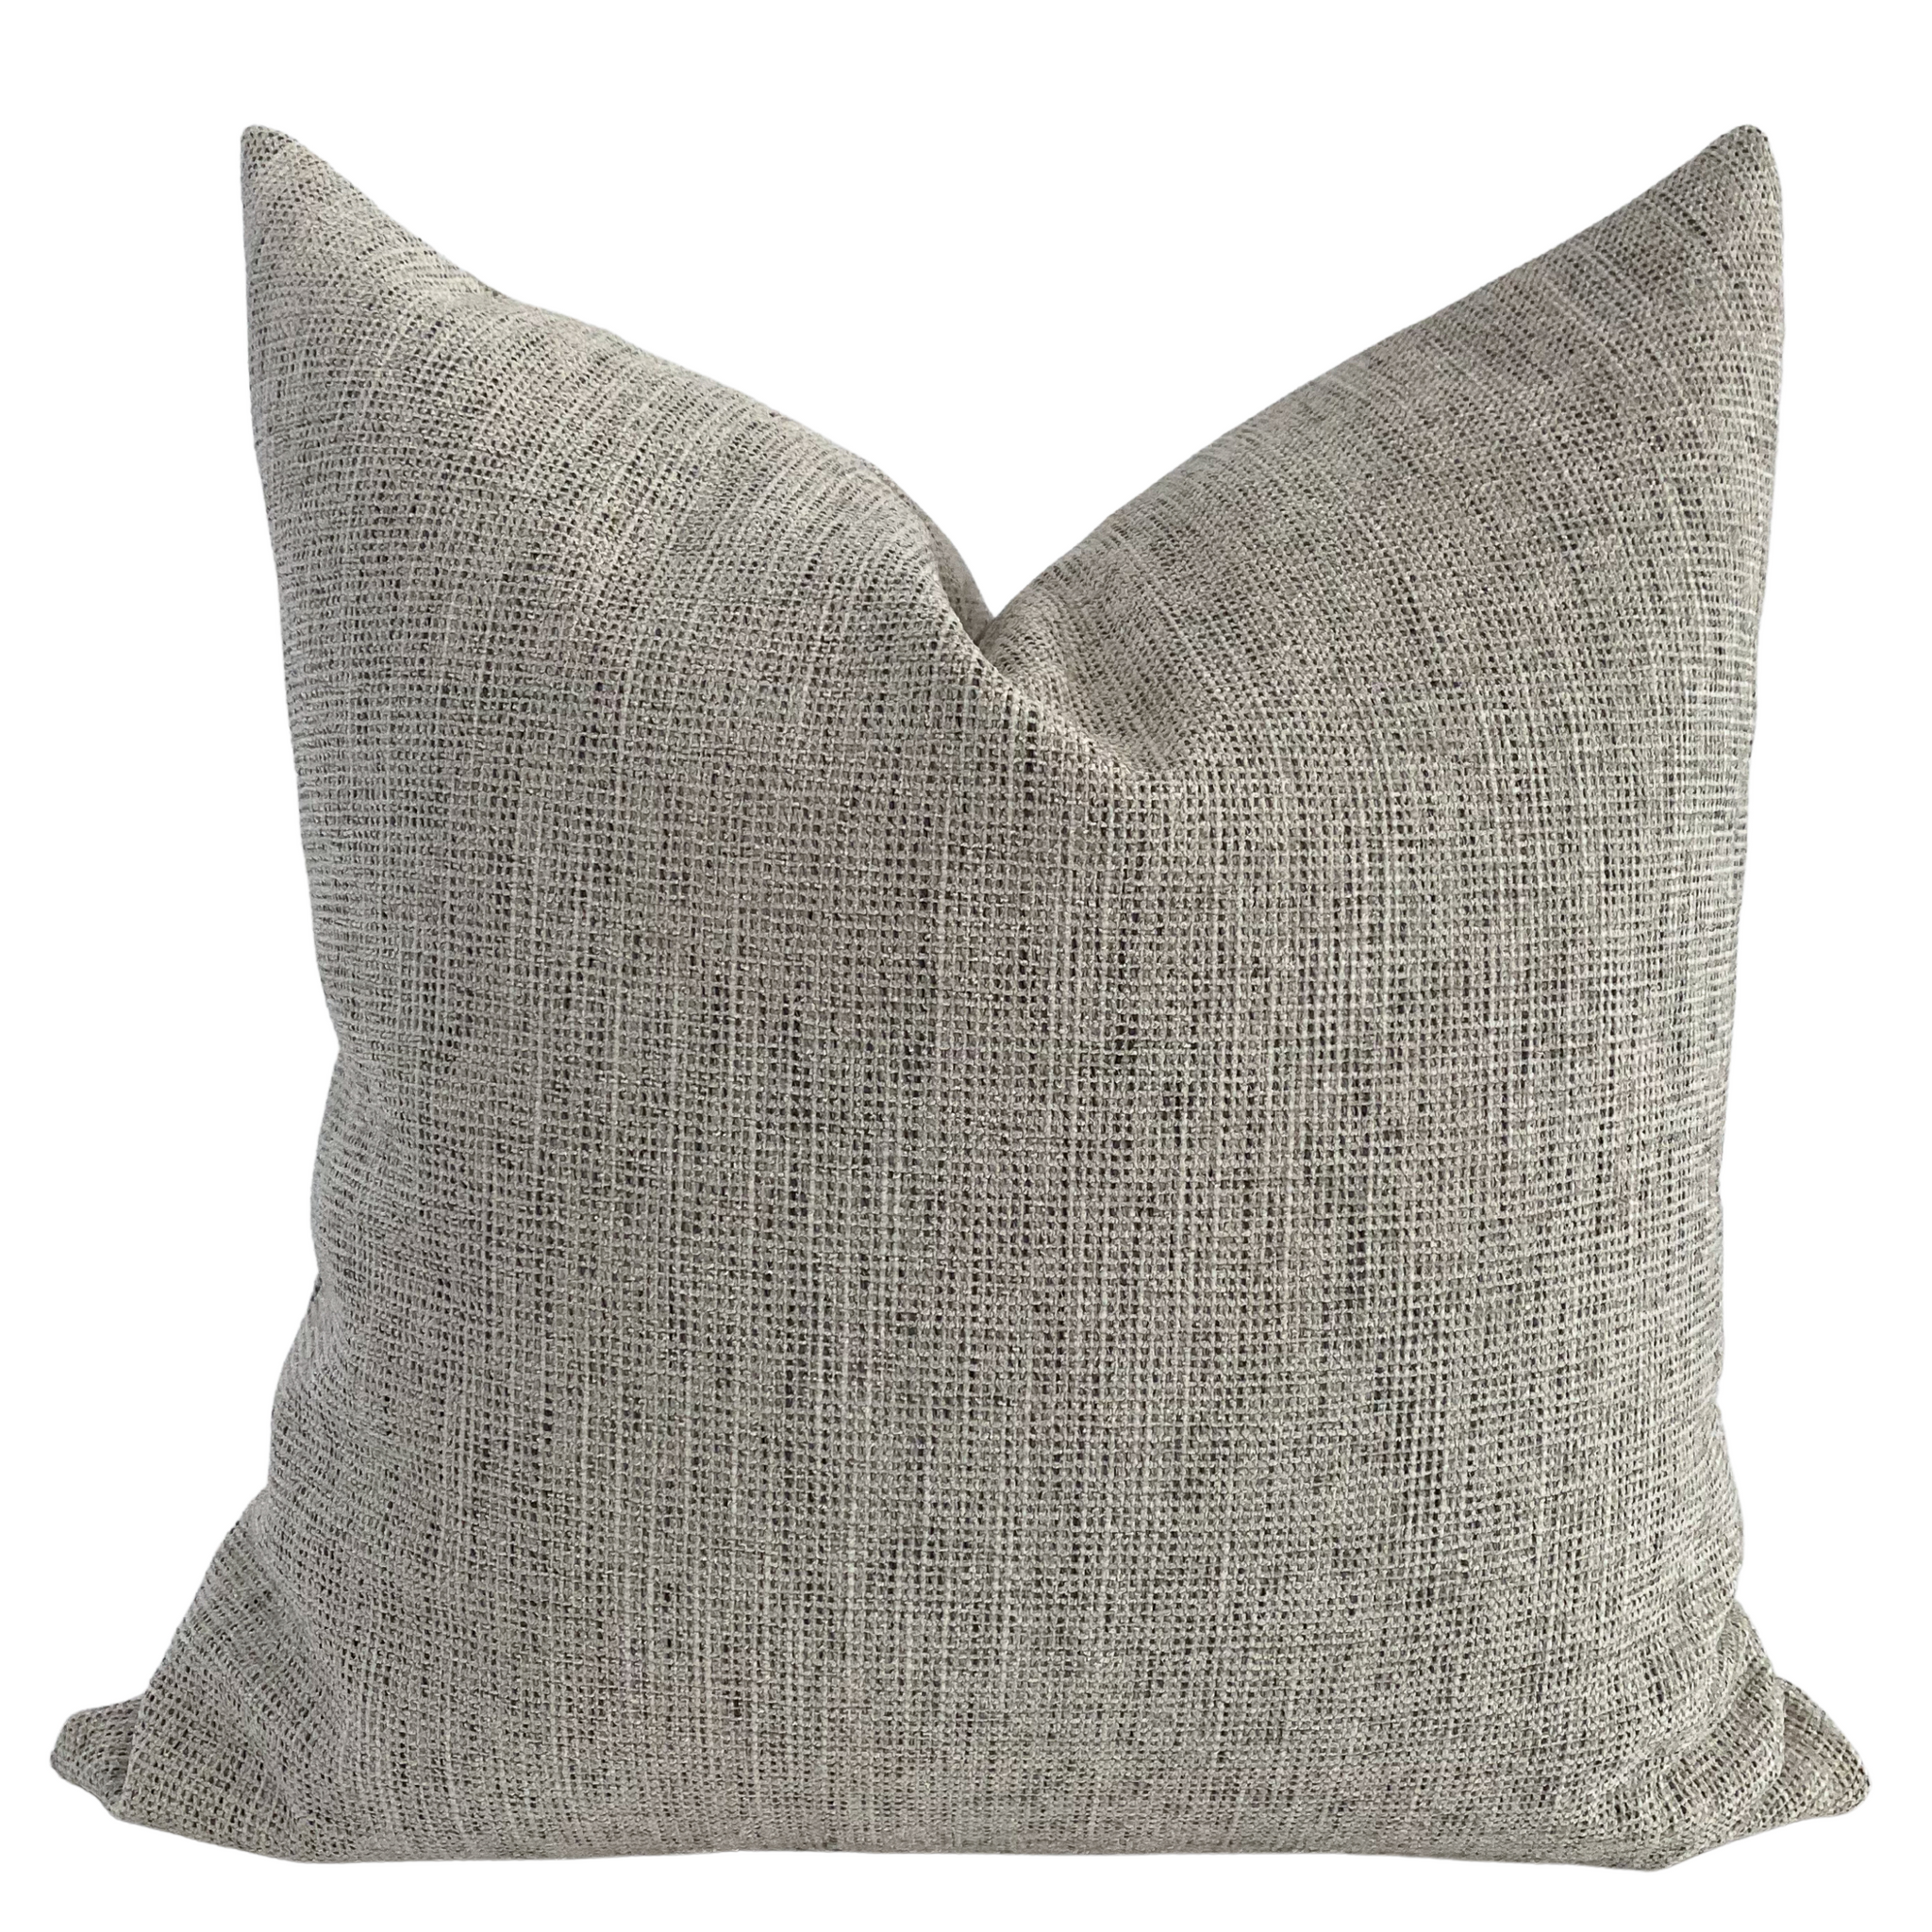 Solid Gray Pillow, Textured Gray Pillow, Designer Pillows, Hackner Home, Neutral pillow covers, How to layer pillows, How to style pillow patterns